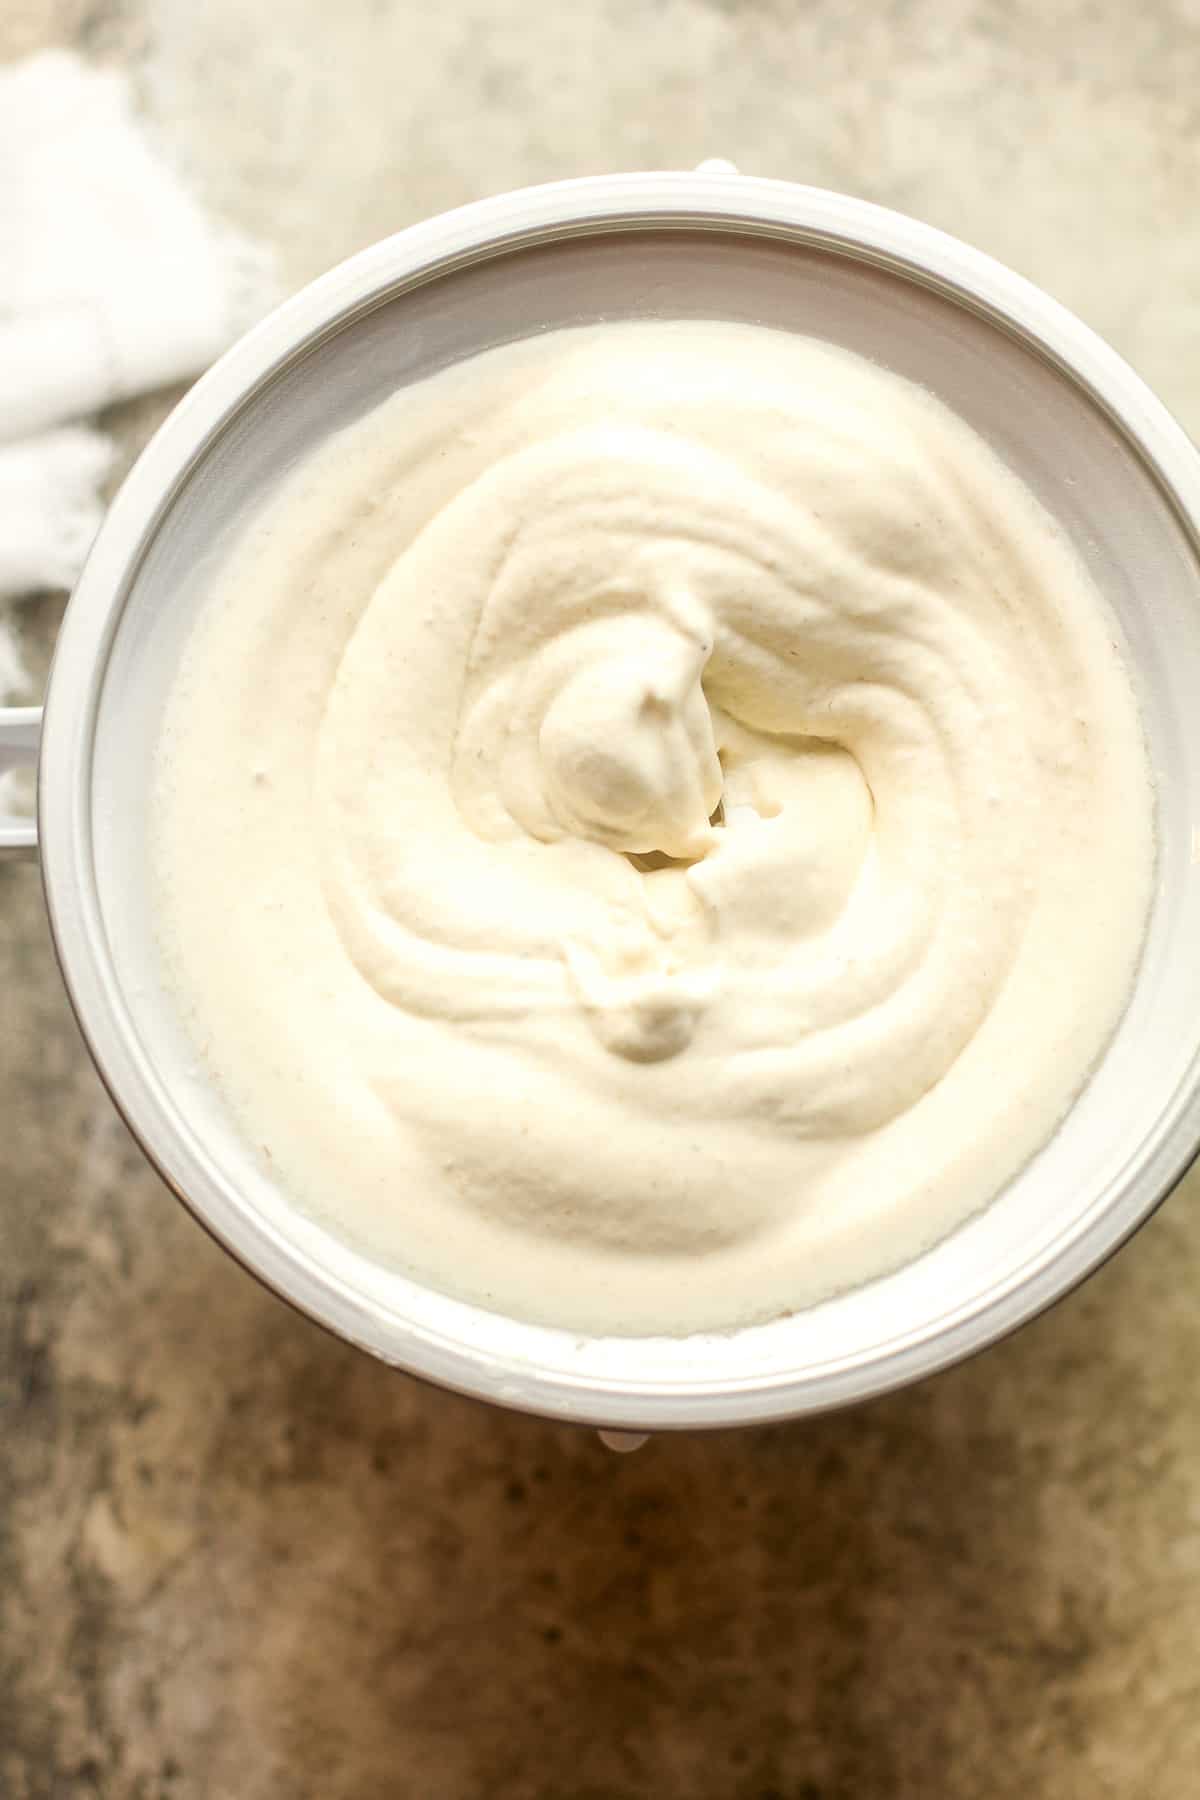 An ice cream base with the banana ice cream after churning.